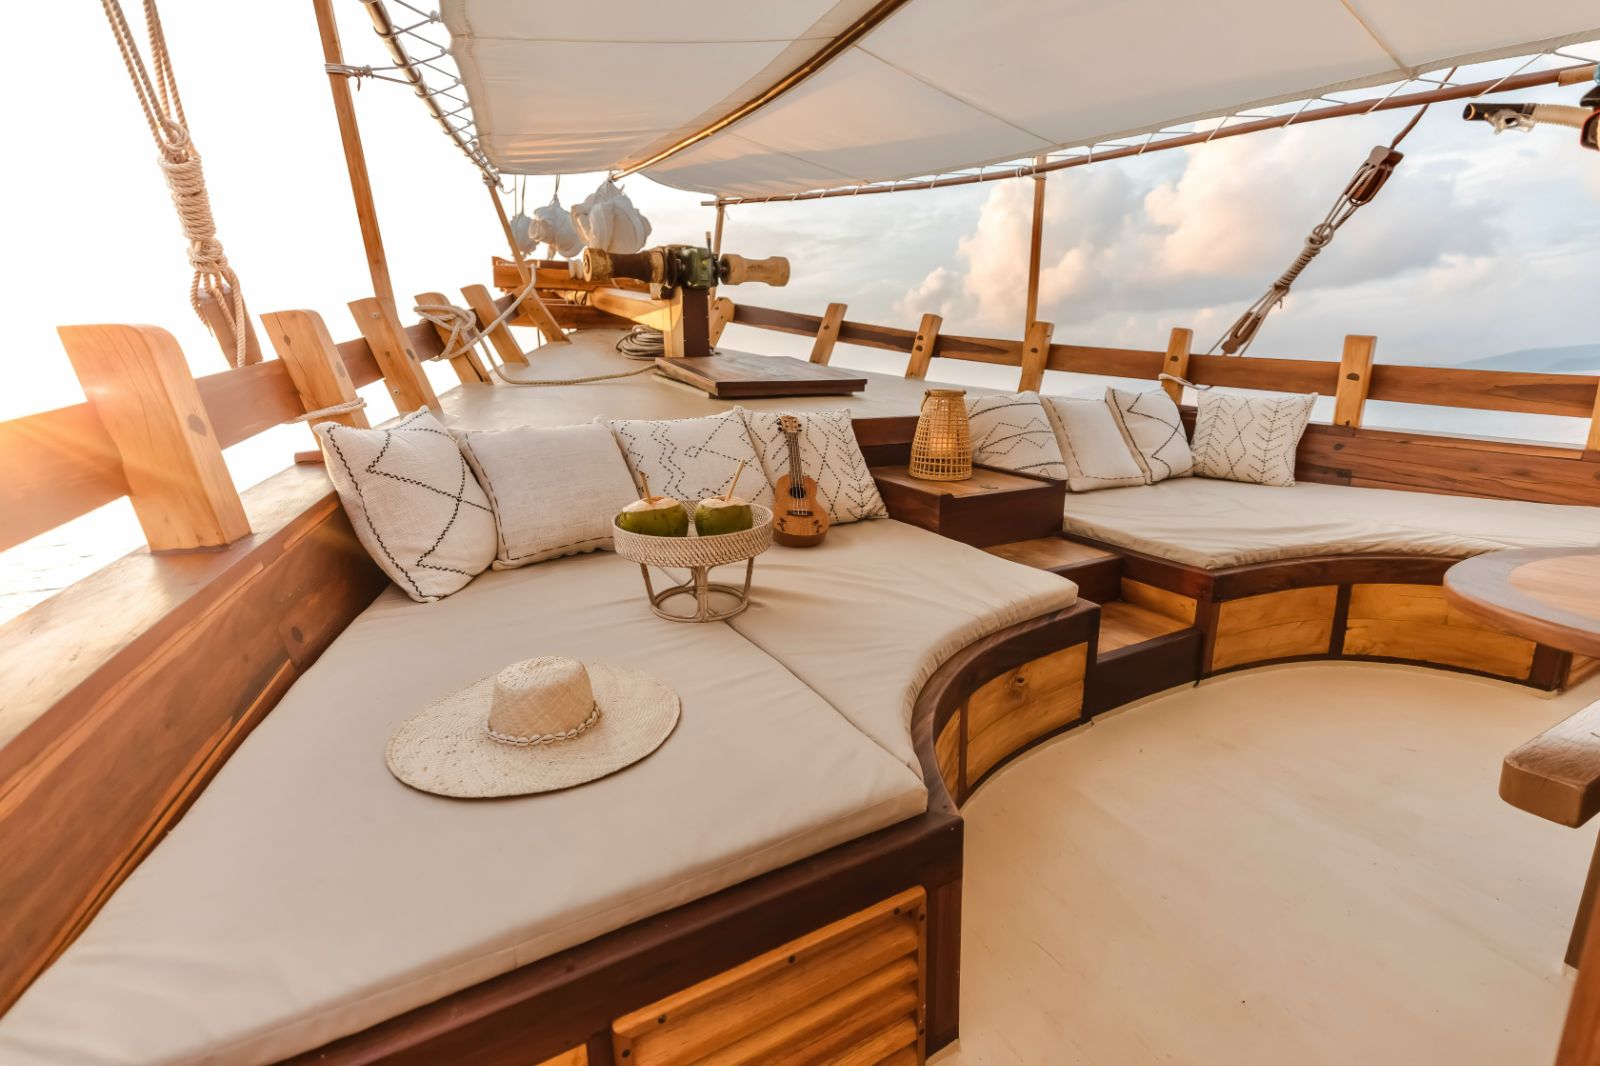 Upper lounge onboard the Senja phinisi in Indonesia